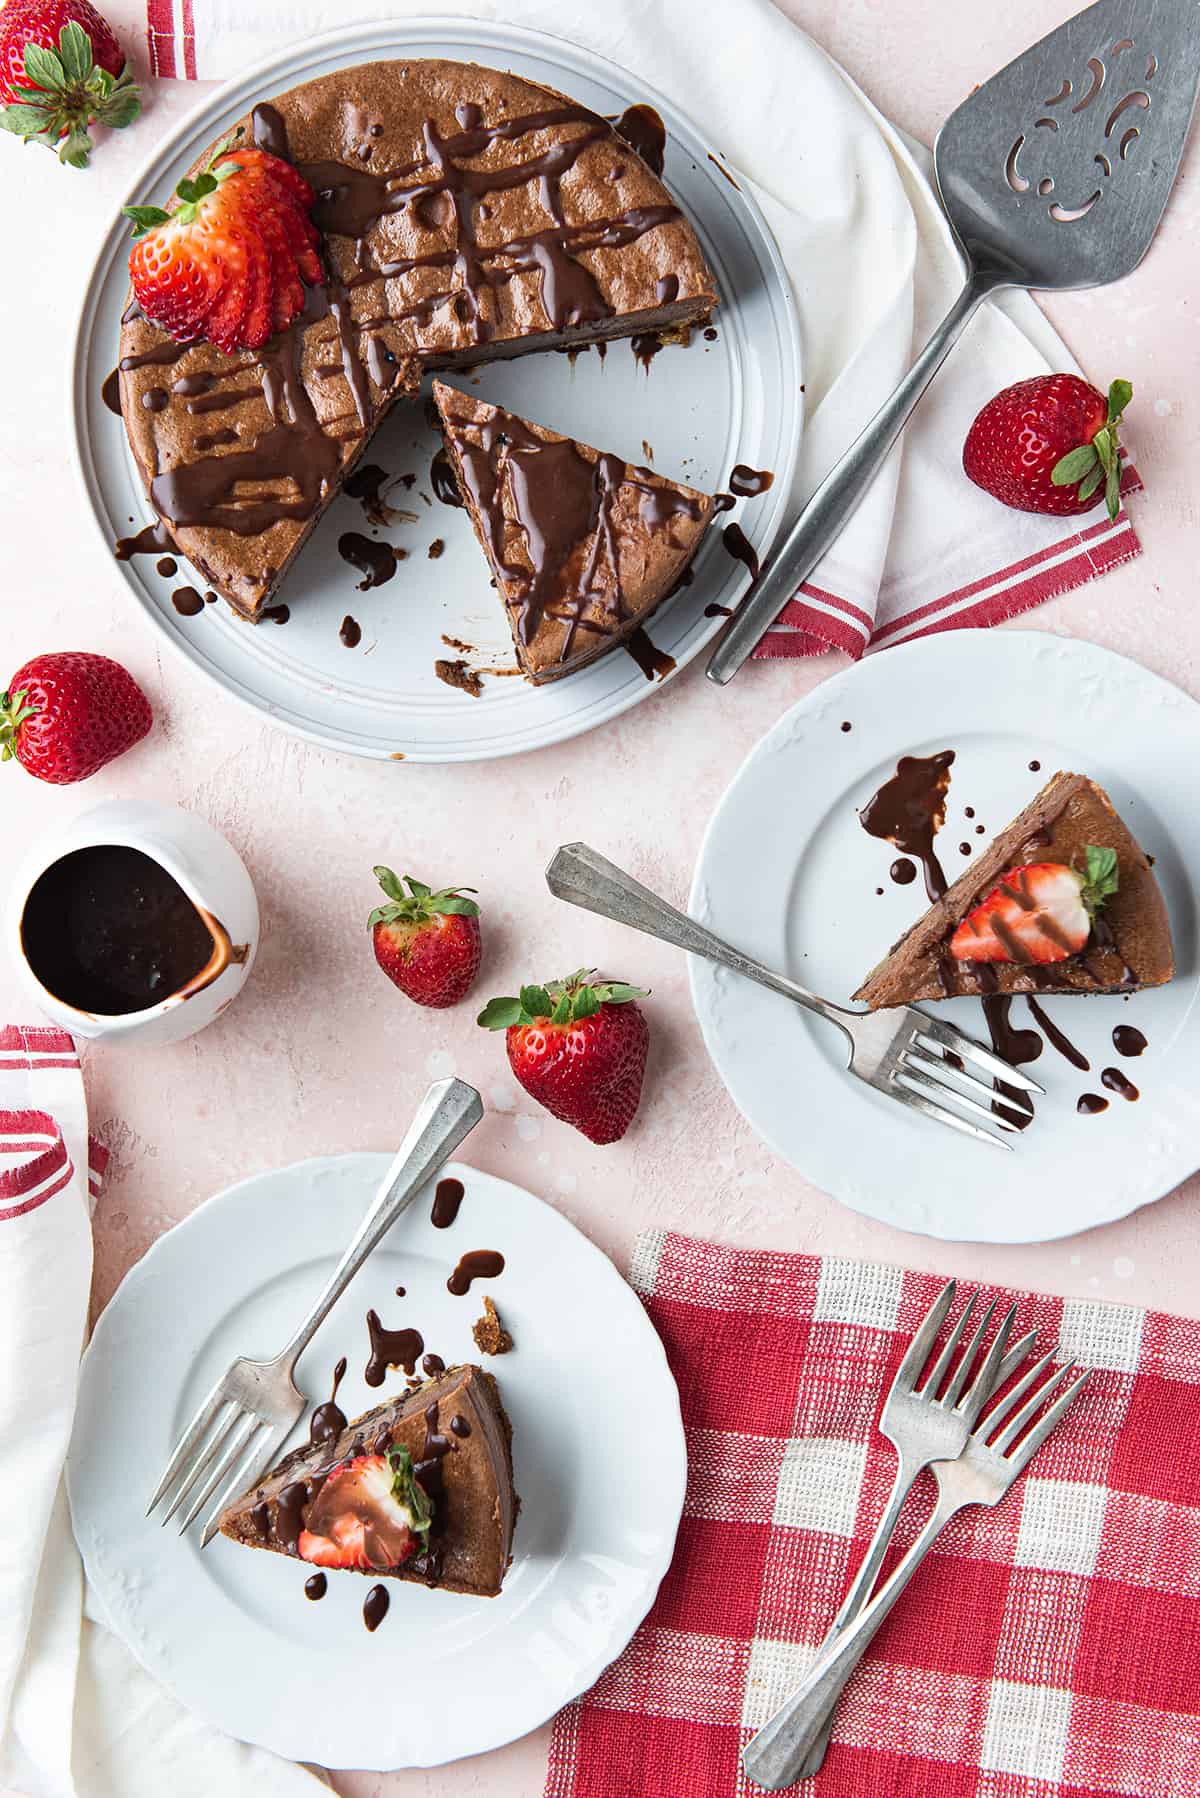 Nutella cheesecake, sliced on pink surface, with slices on white plates + red checked napkin